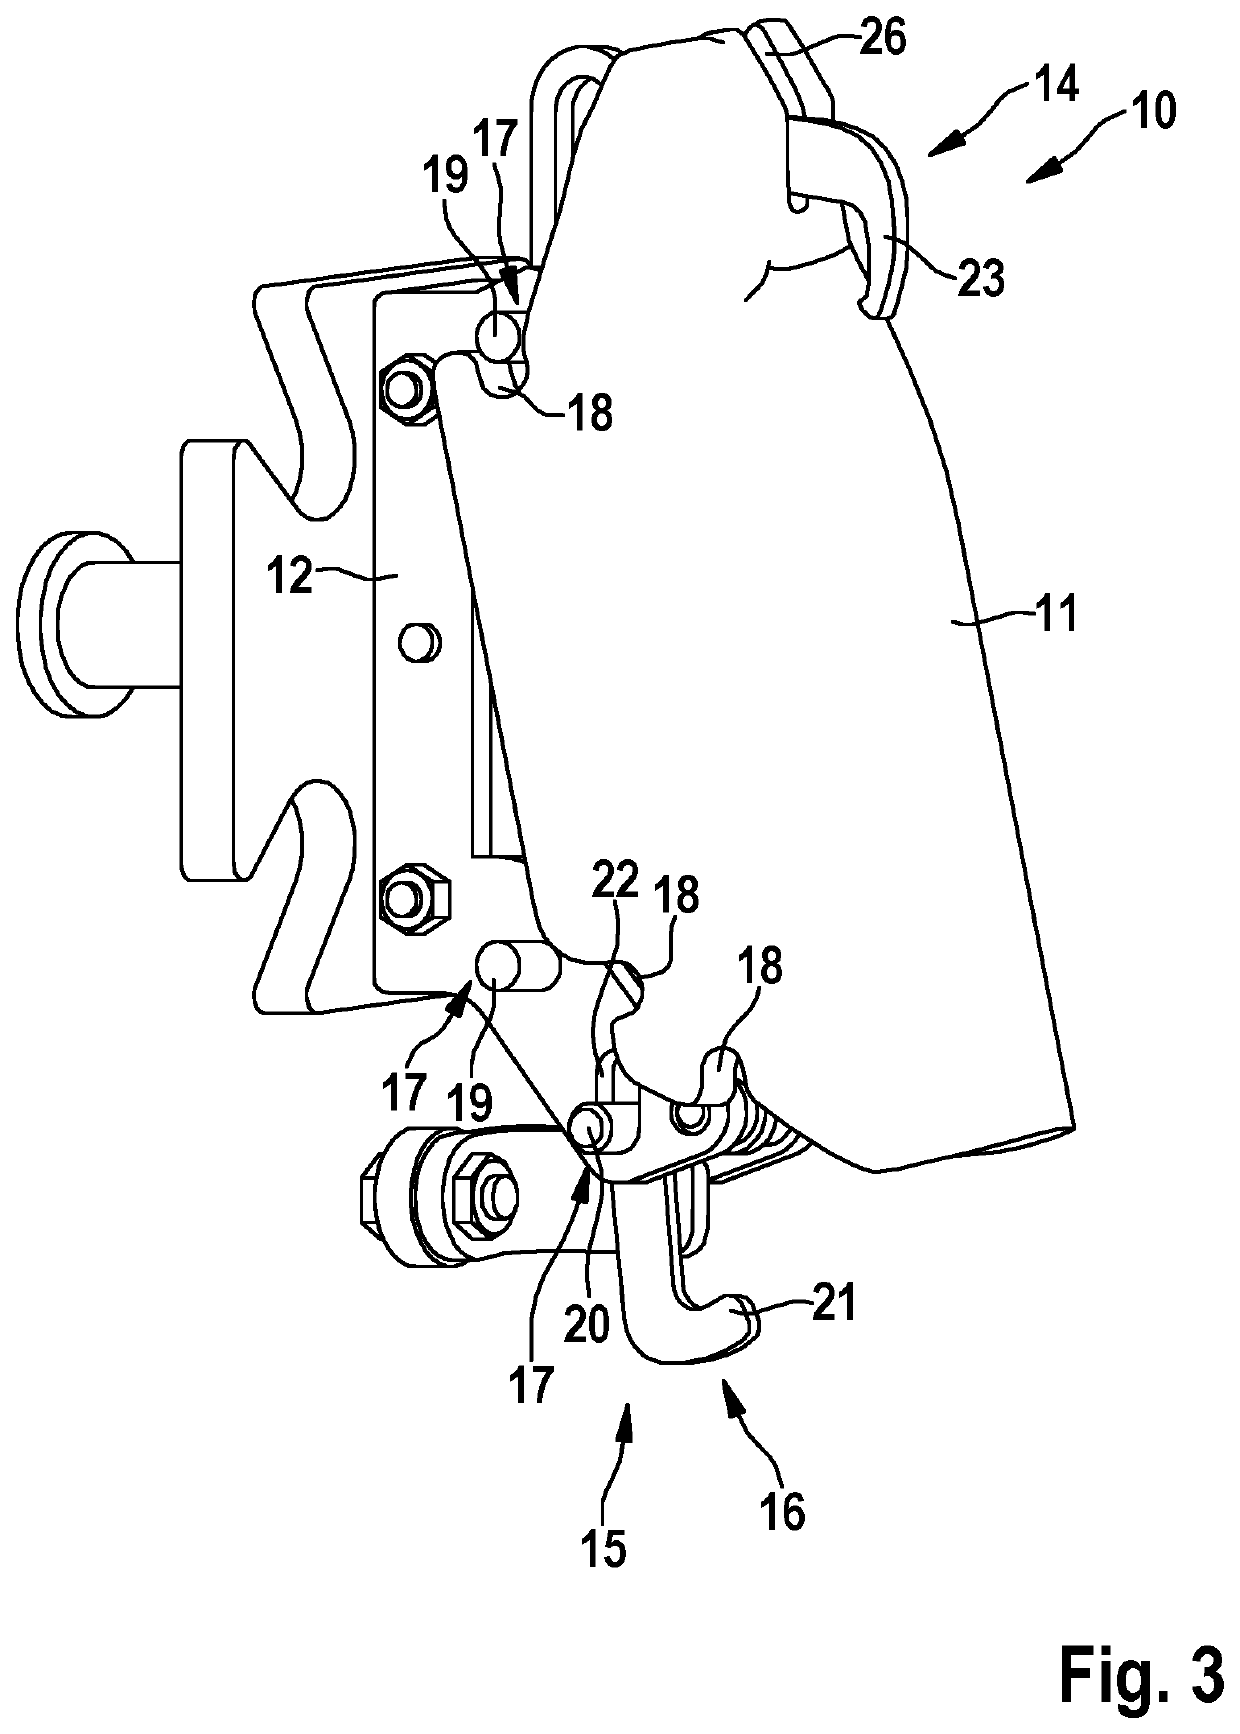 Holding device for holding eviscerated poultry carcasses or parts thereof during processing in a device for processing eviscerated poultry carcasses or parts thereof